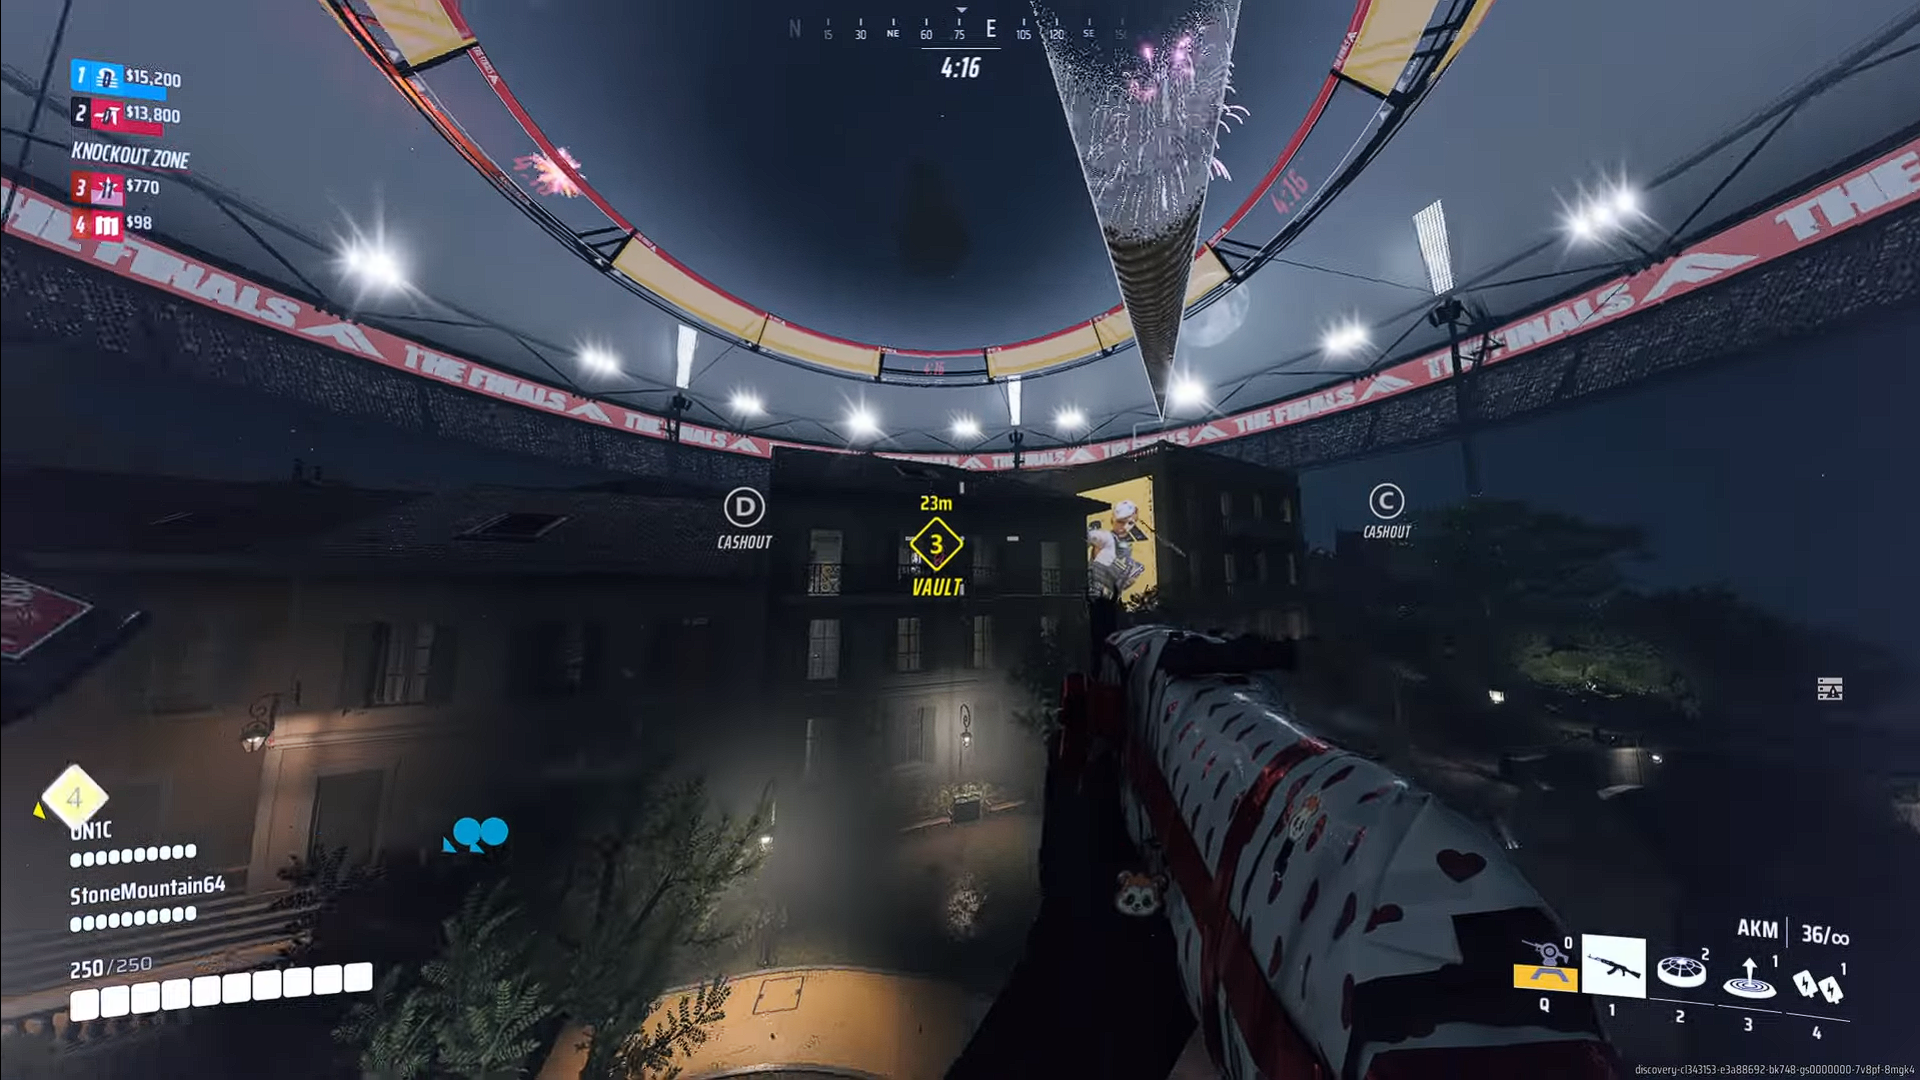 A screenshot of the gameplay in The Finals.